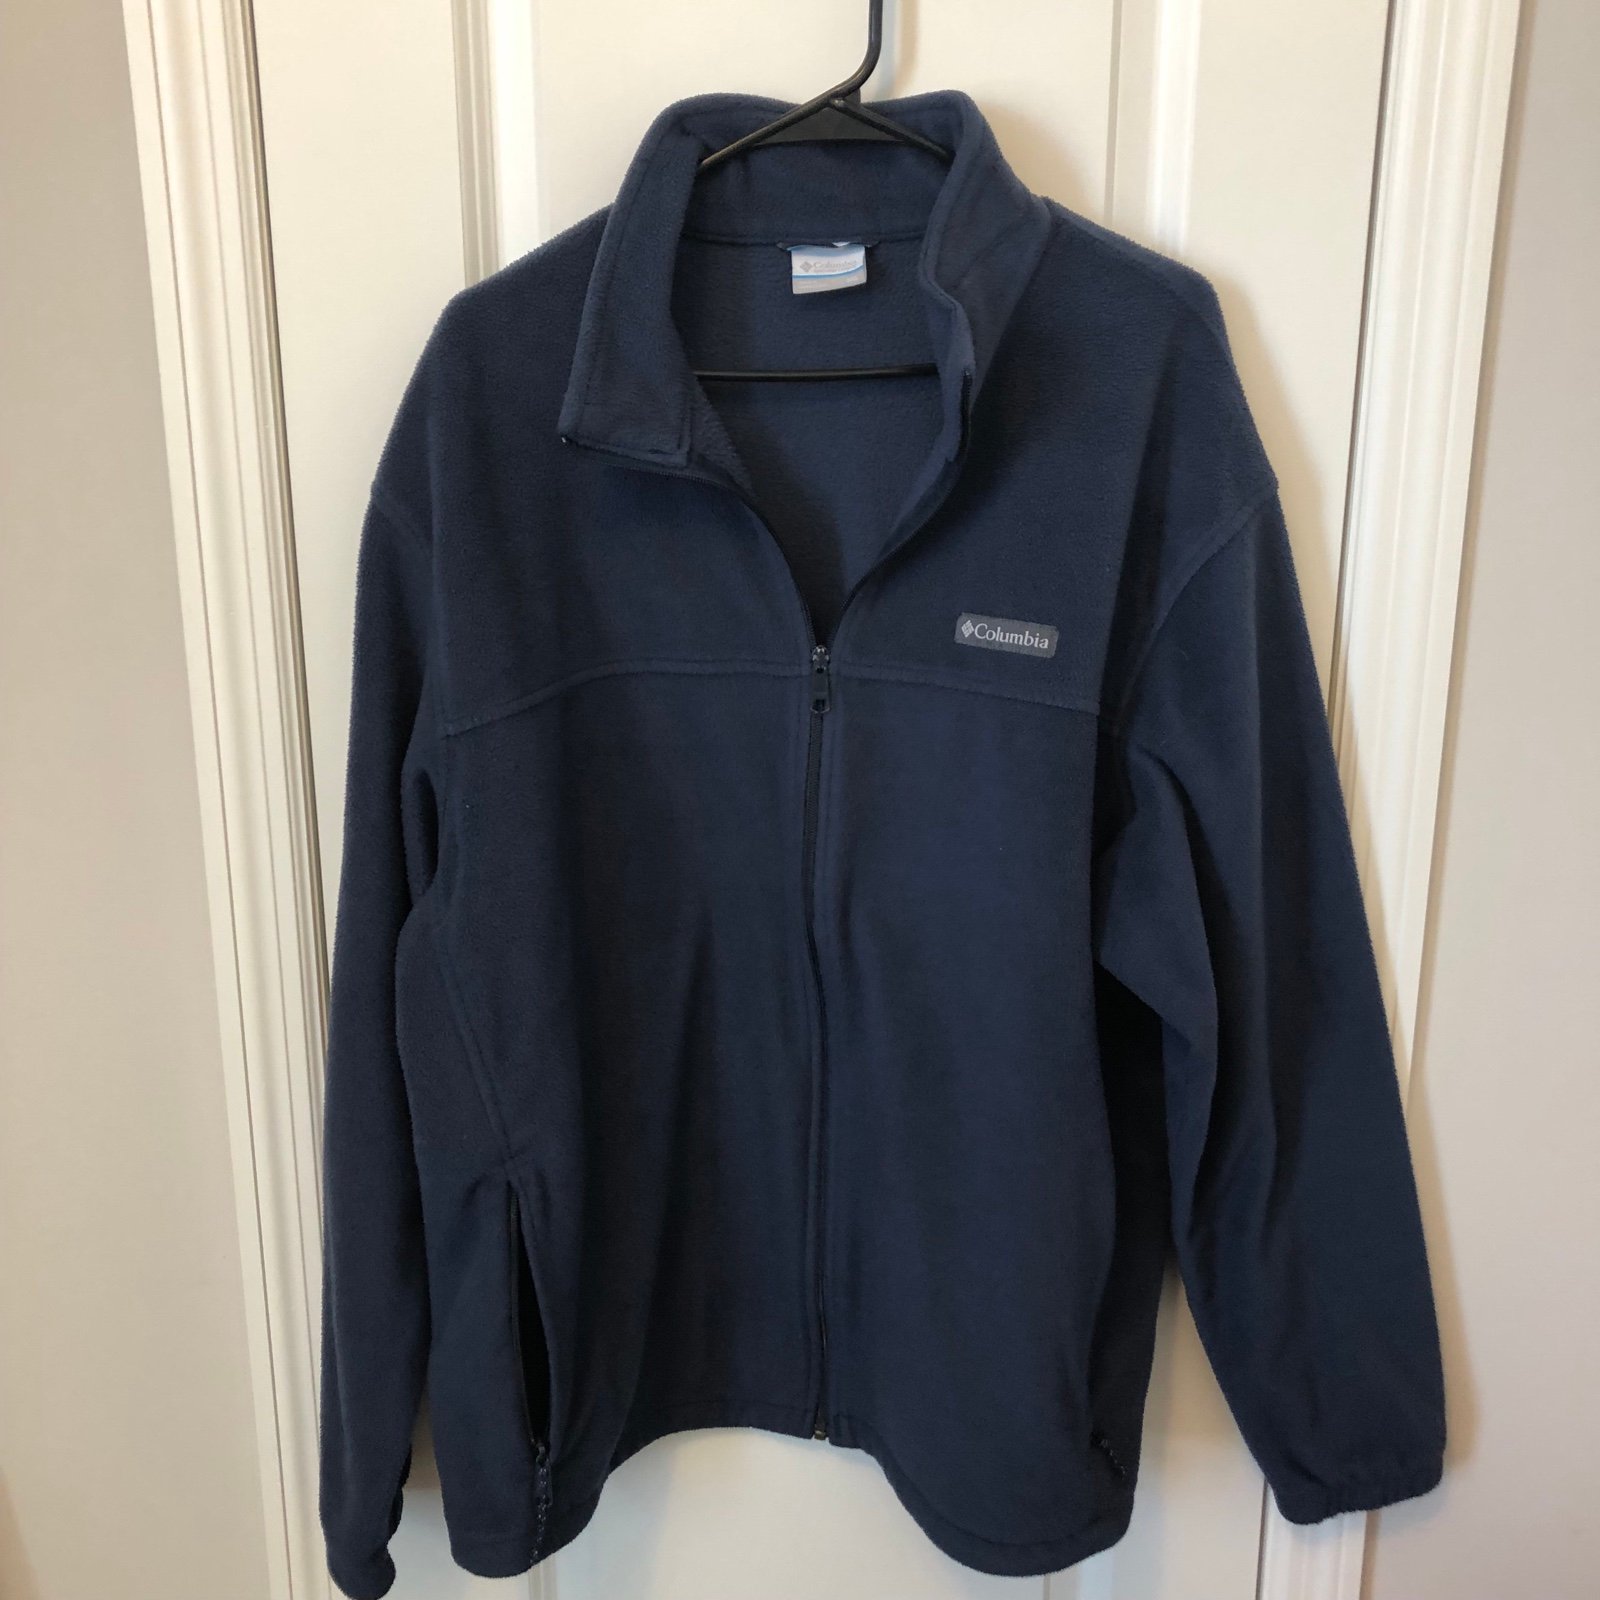 save up to 70% Columbia Women’s XXL Full Zip Blue Fleece Jacket Read kCd24Mnx9 New Style